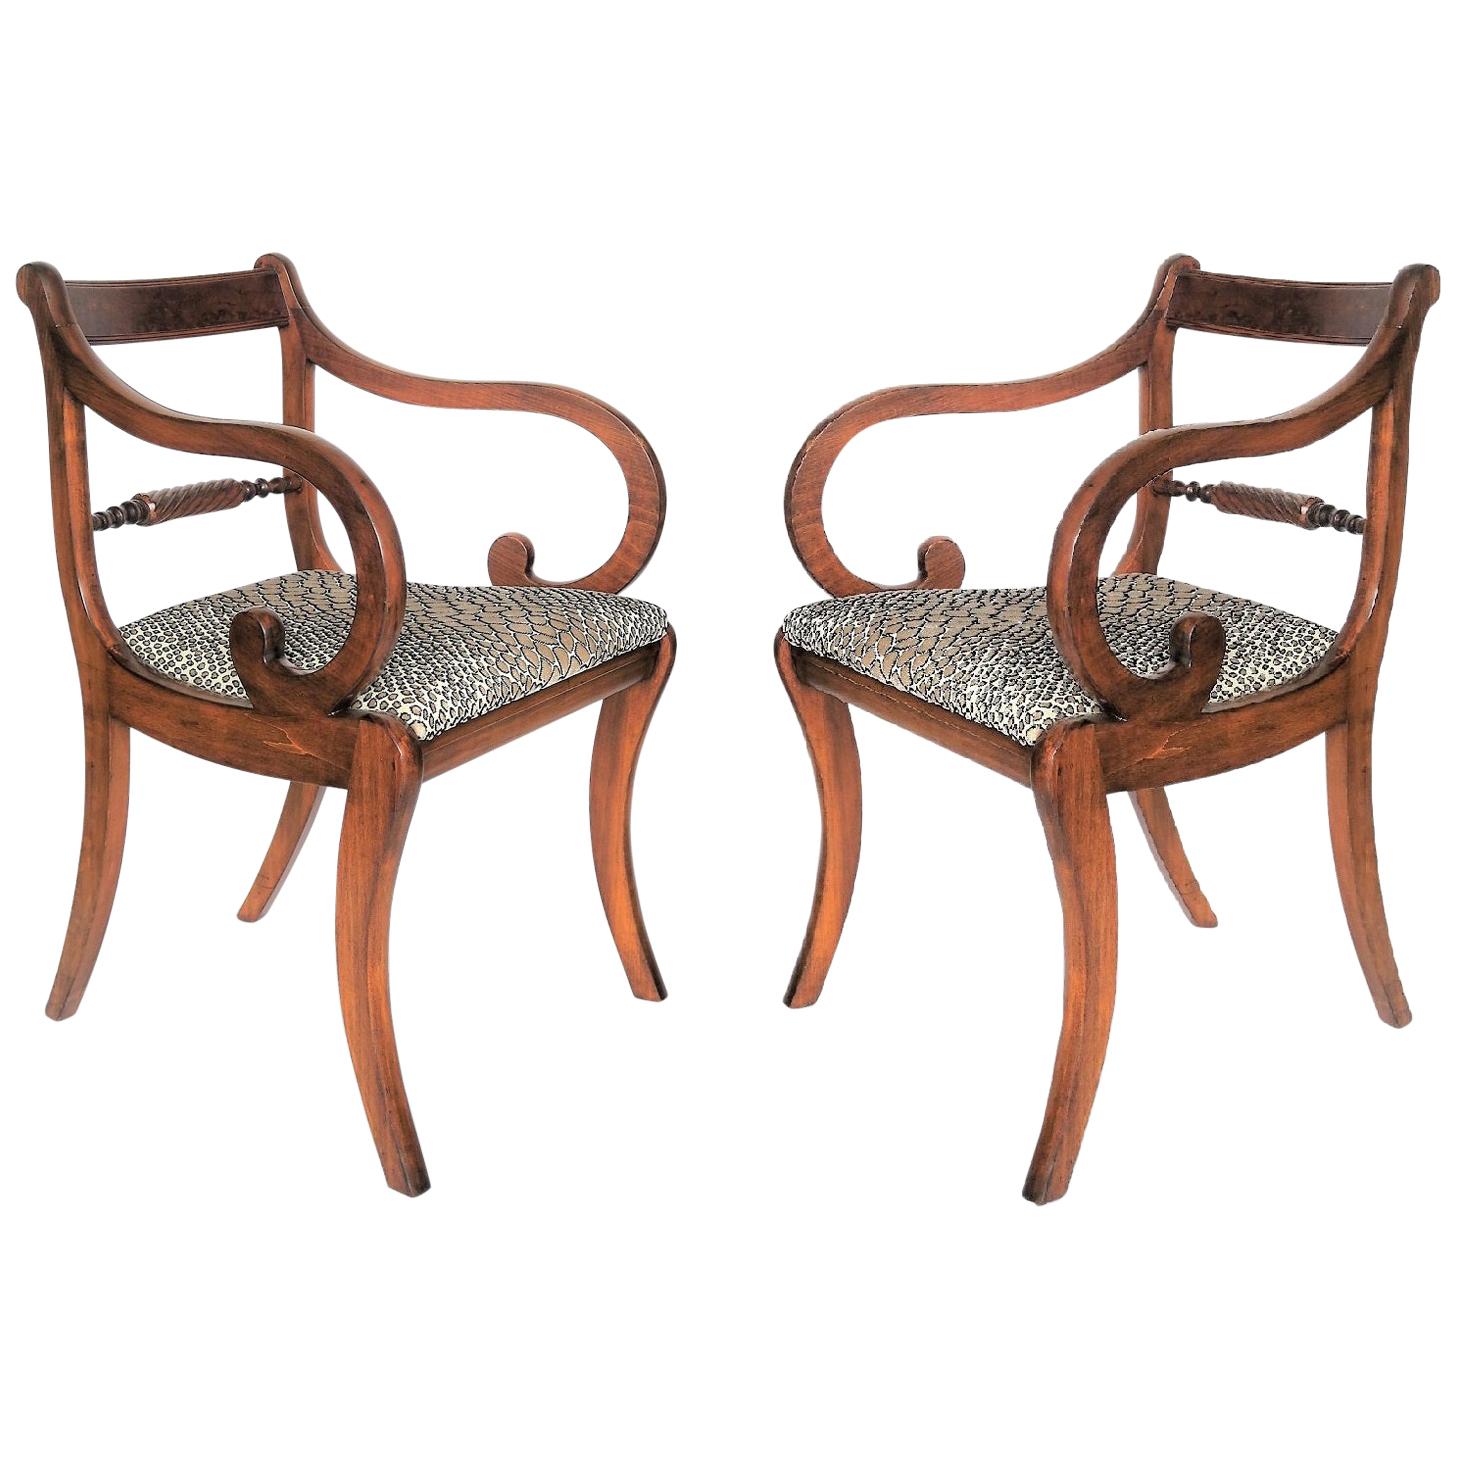 Pair of Directoire Armchairs in Mahogany with Velvet Fabric, France, circa 1850